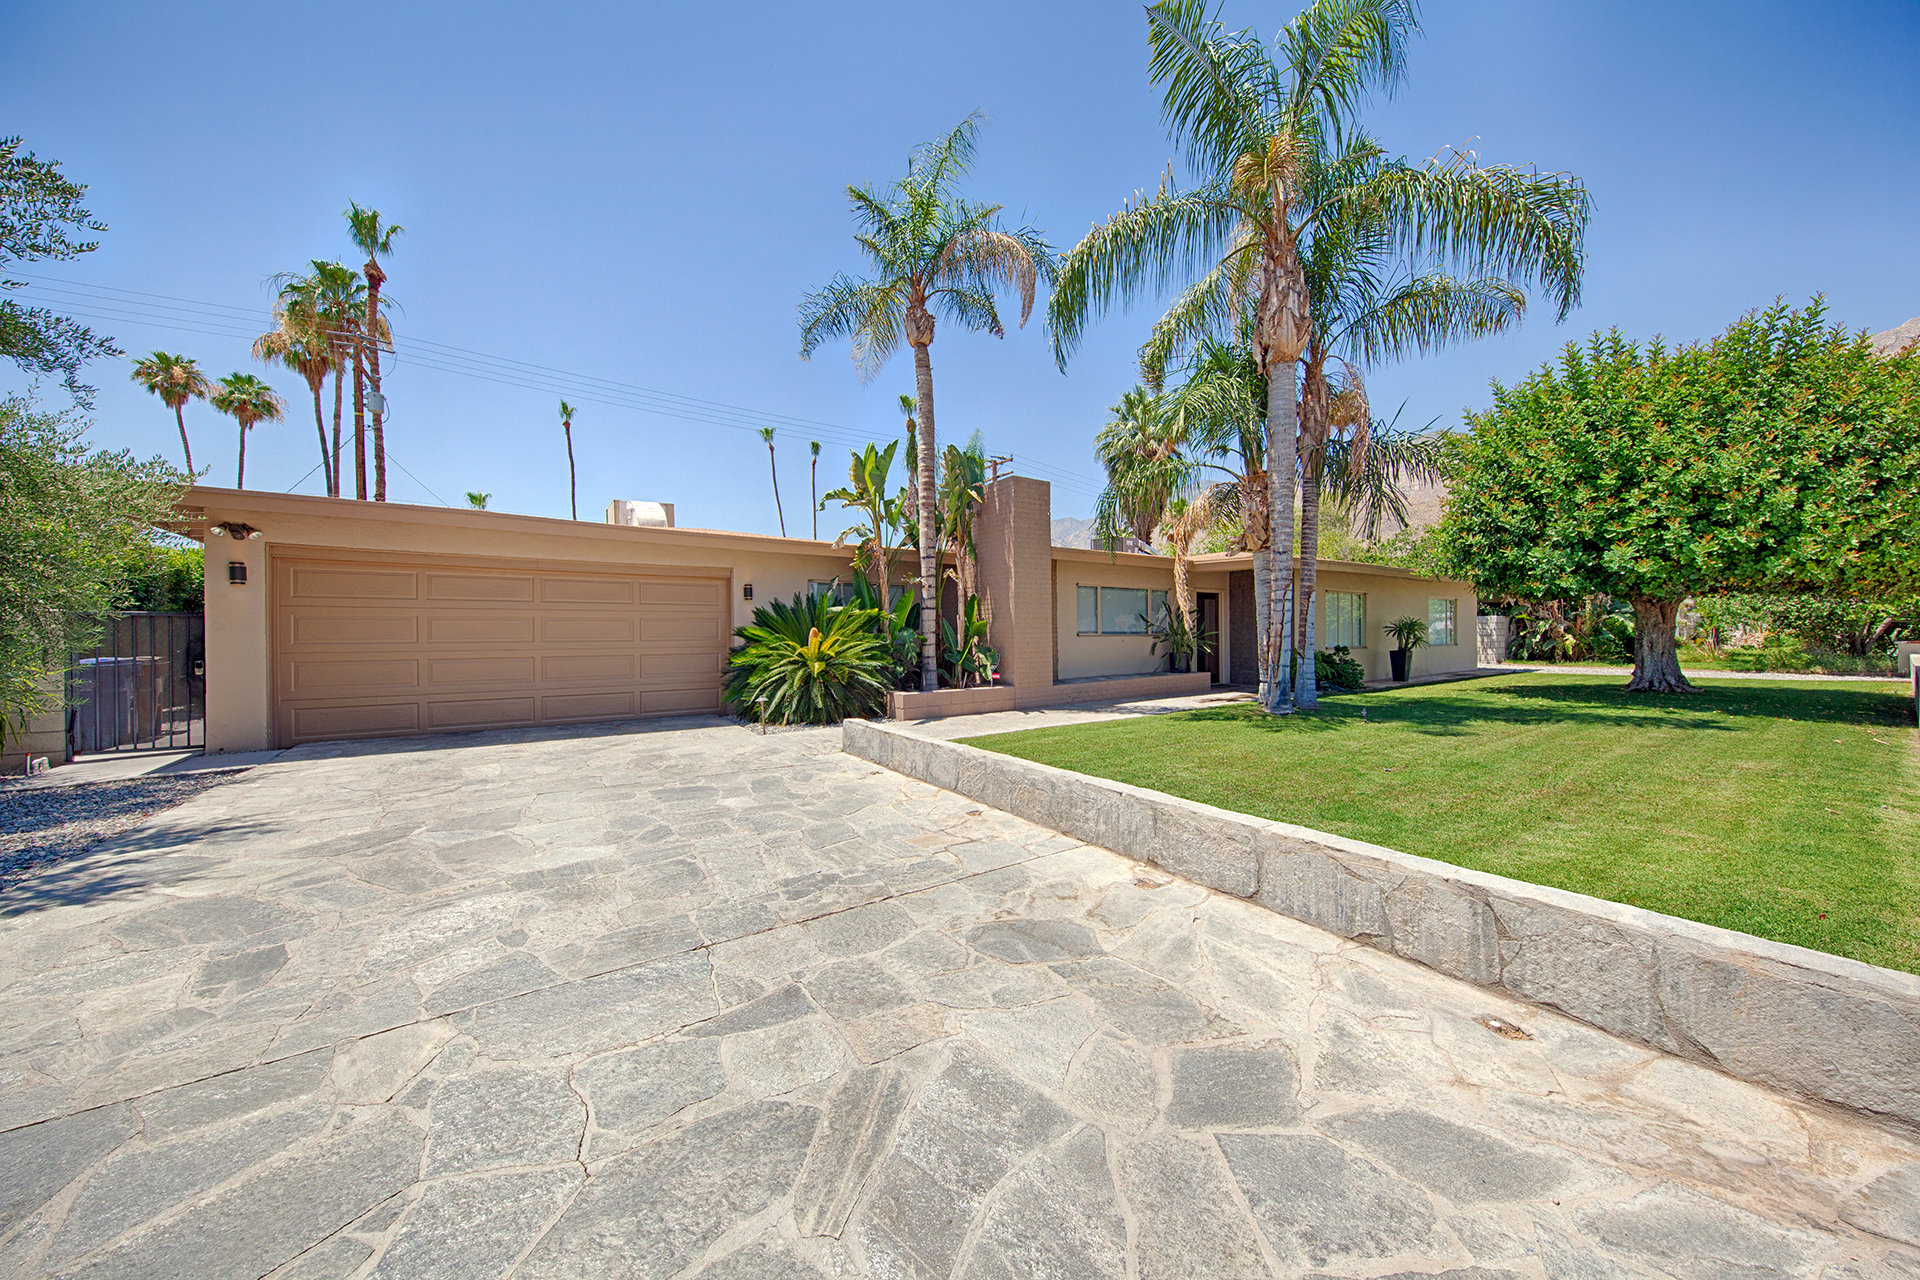 The front view of a mid-century modern home in Tahquitz River Estates